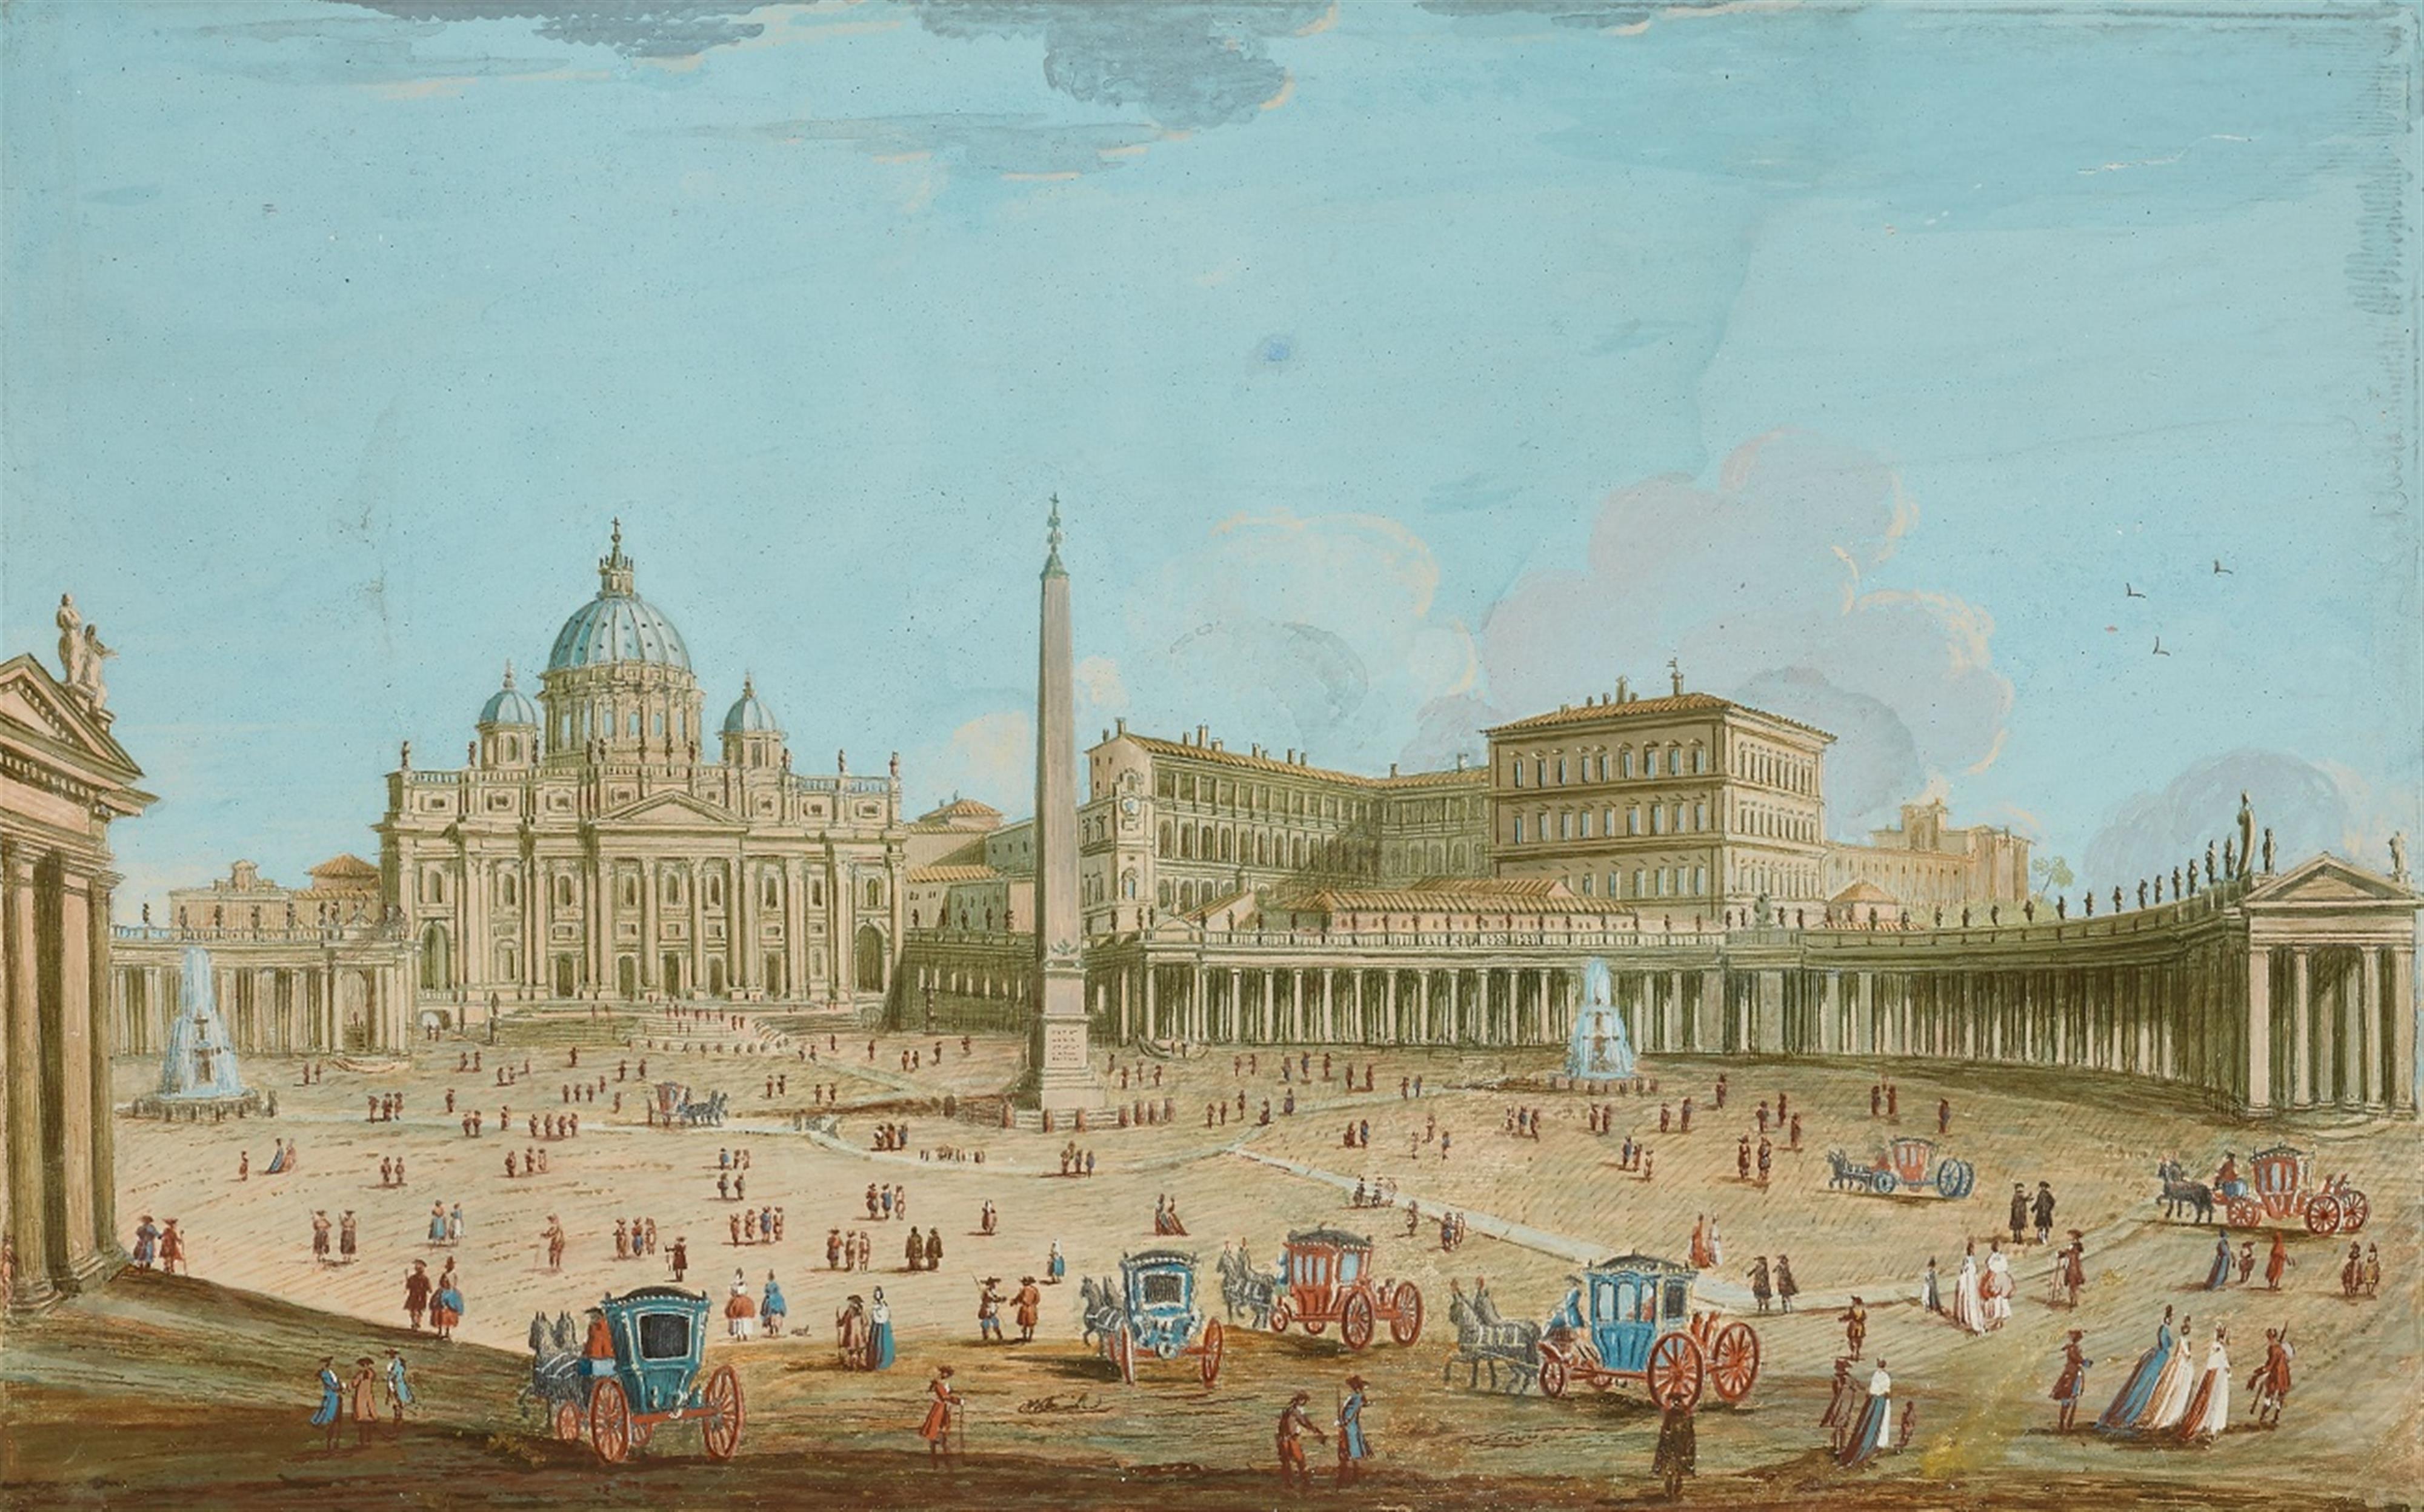 Francesco Panini, attributed to - Saint Peter's Square in Rome - image-1